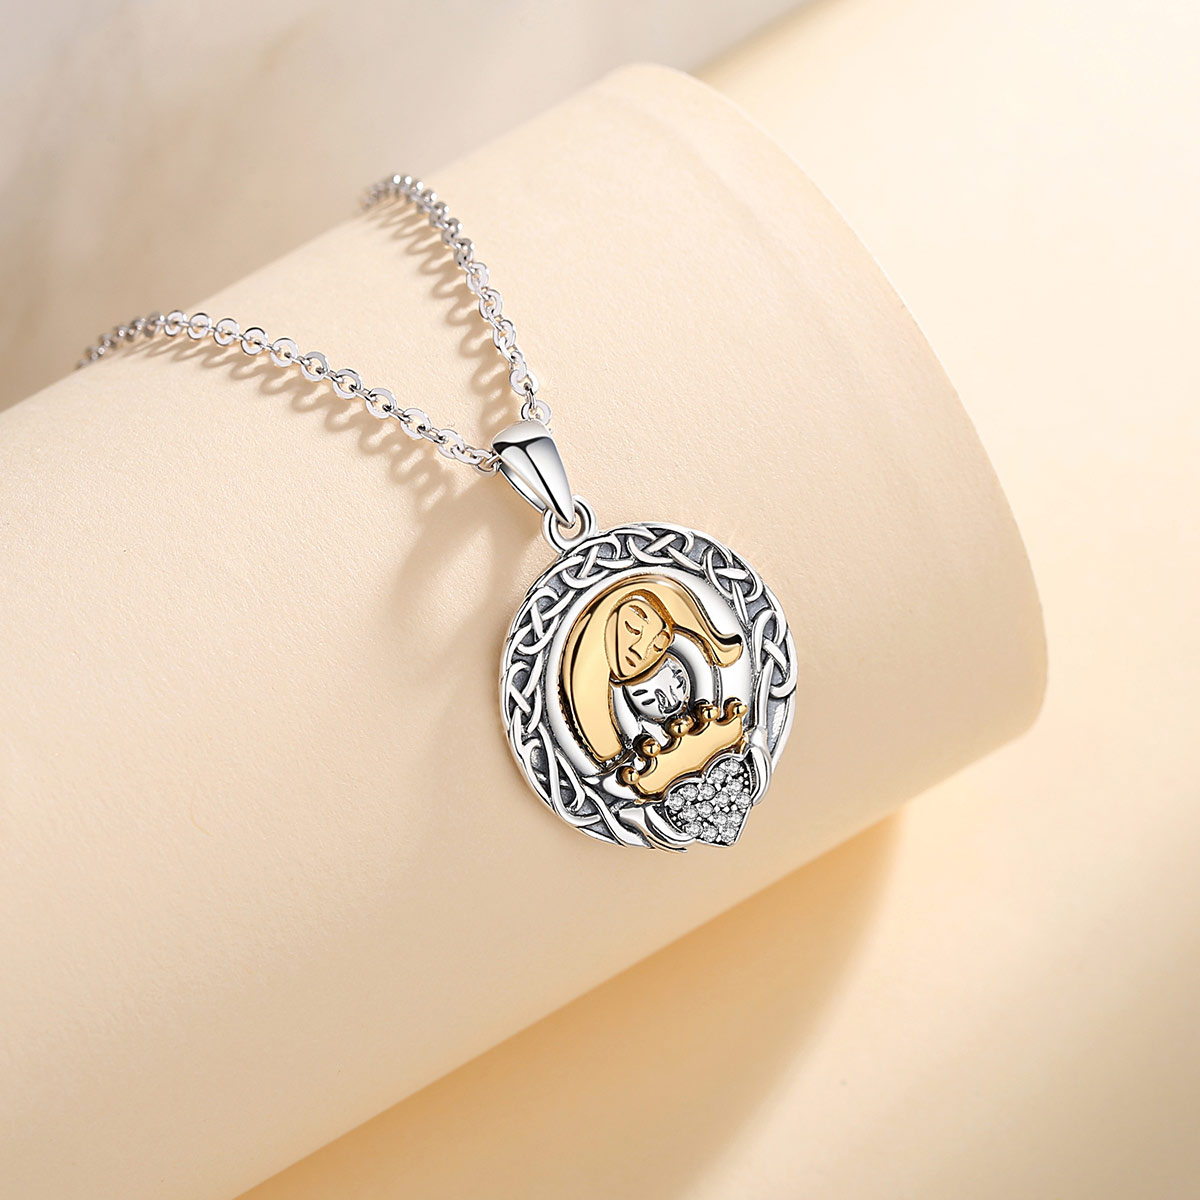 Merryshine Jewelry 925 Sterling Silver Claddagh Mom And Baby Daughter Necklace for Mothers Day